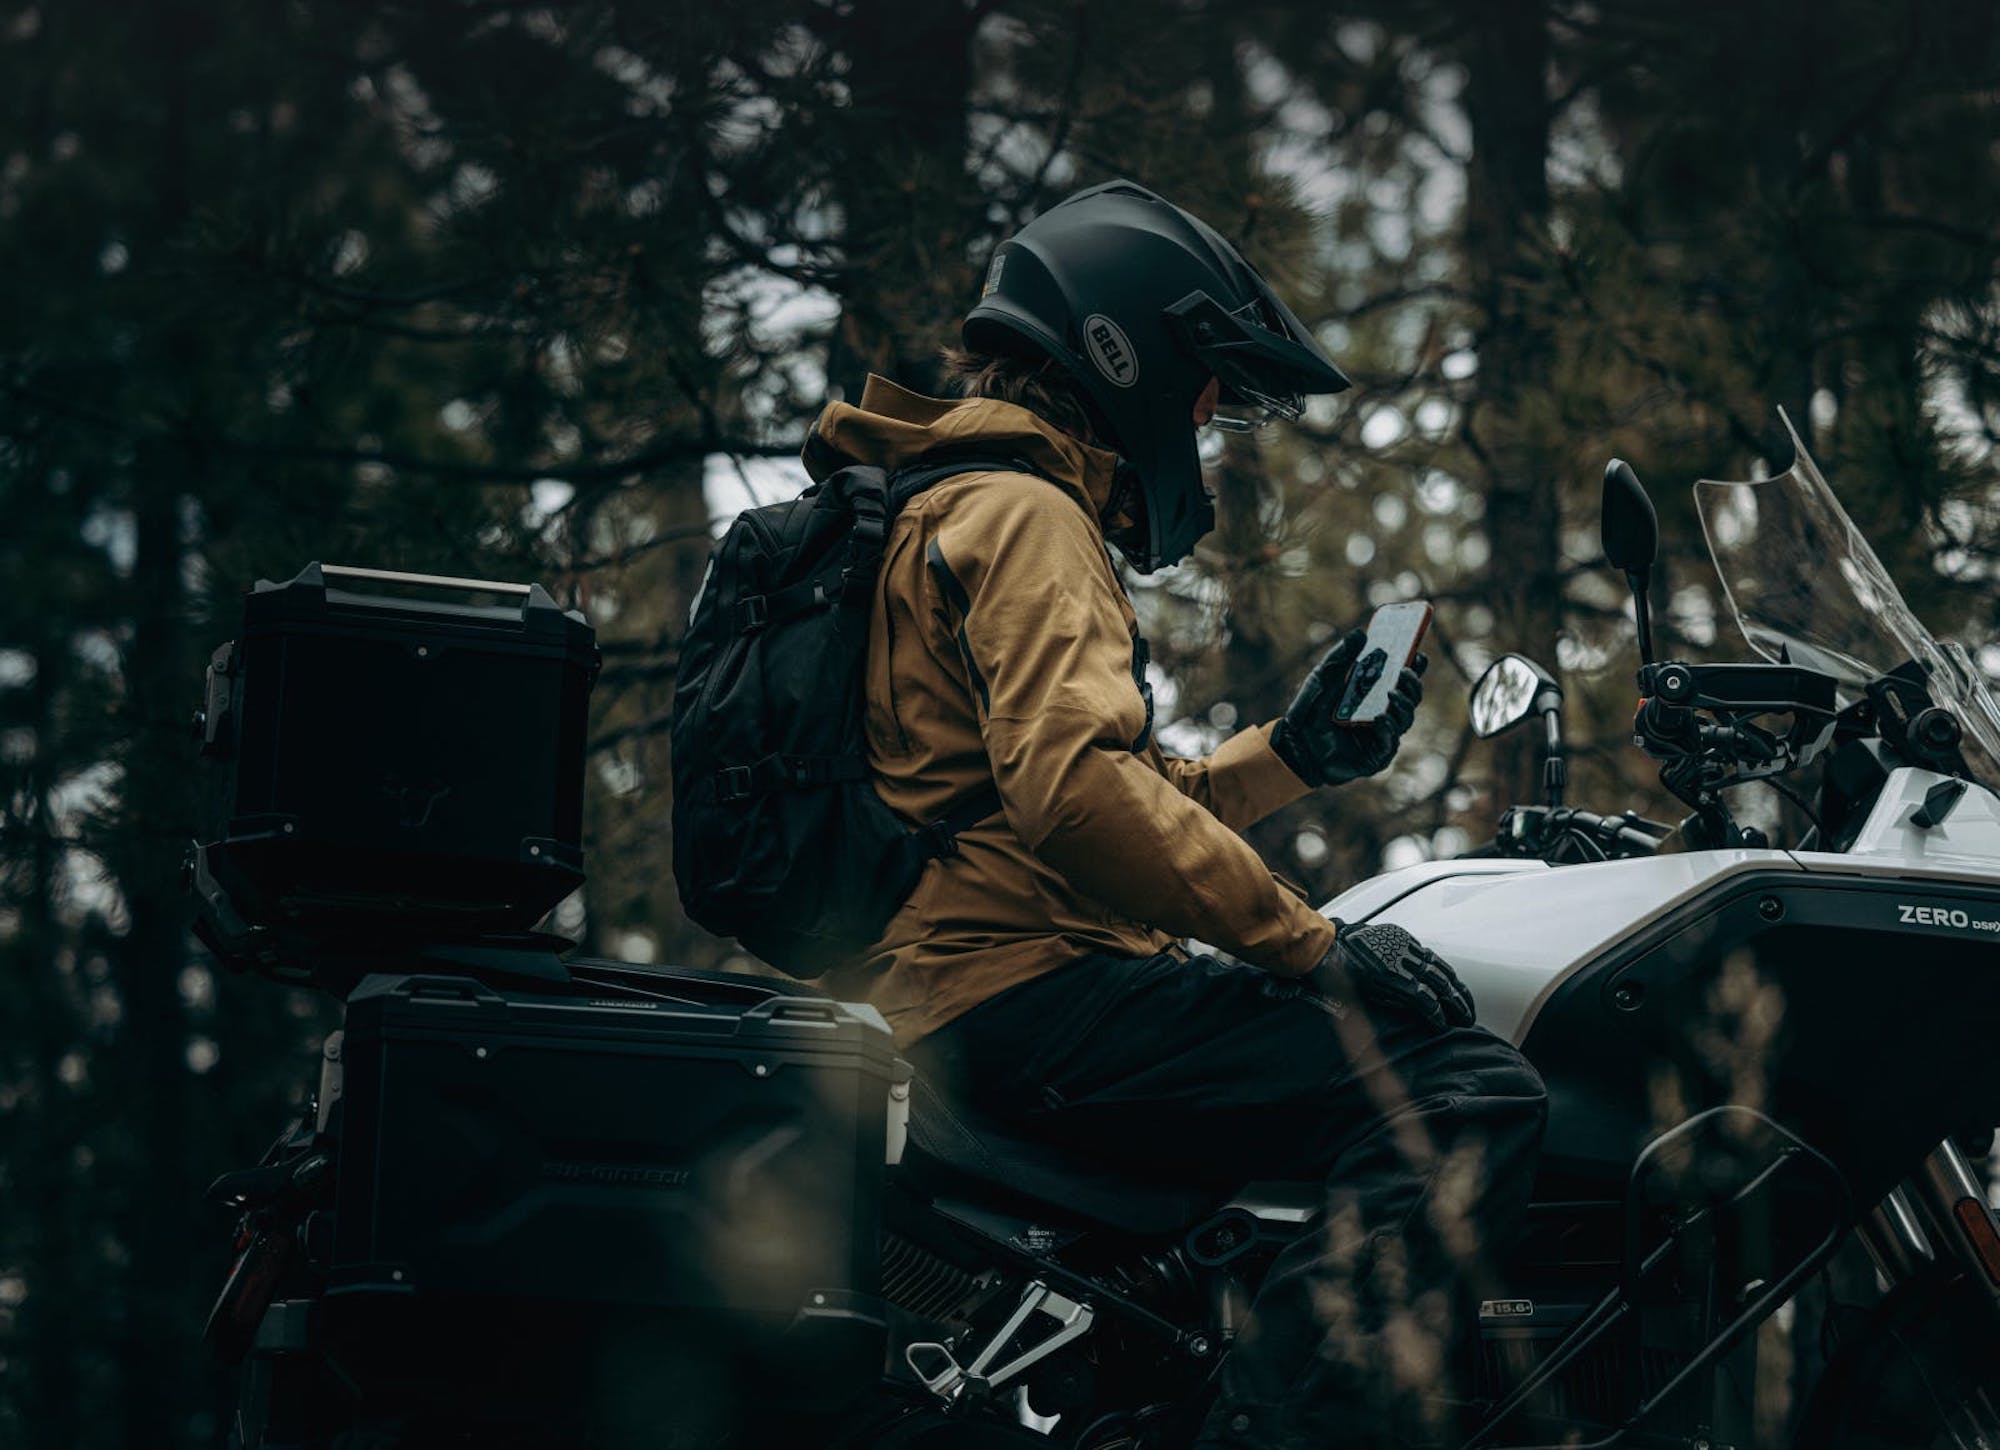 A view of an electric Zero motorcycle and rider. Media sourced from Zero Motorcycles.